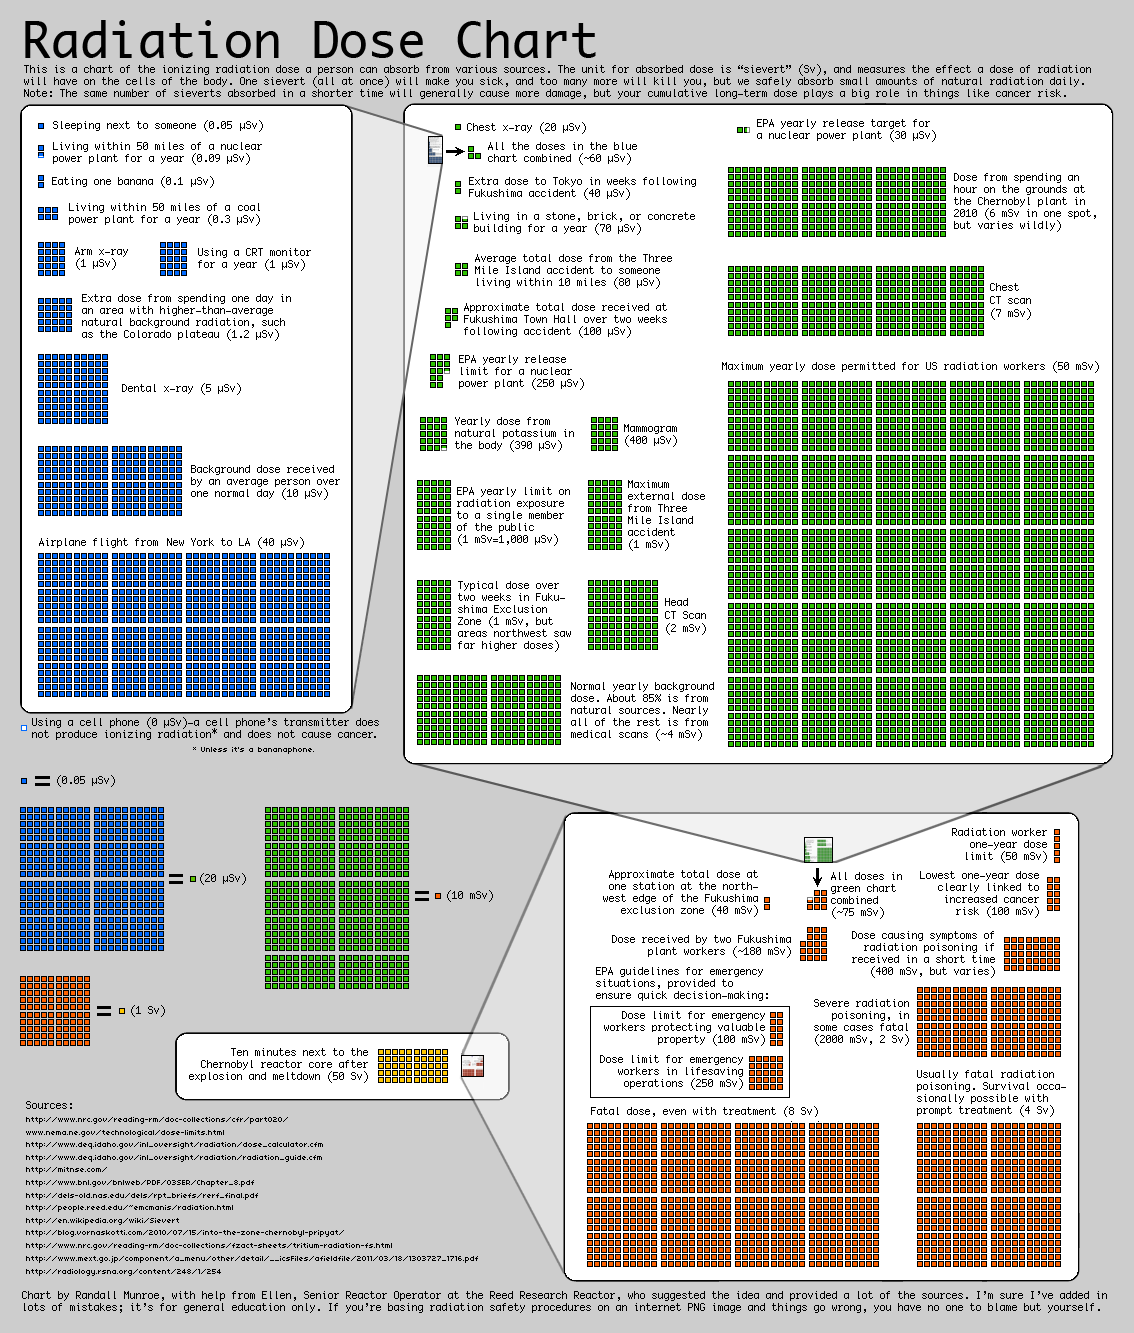 Radiation_Dose_Chart_by_Xkcd.png